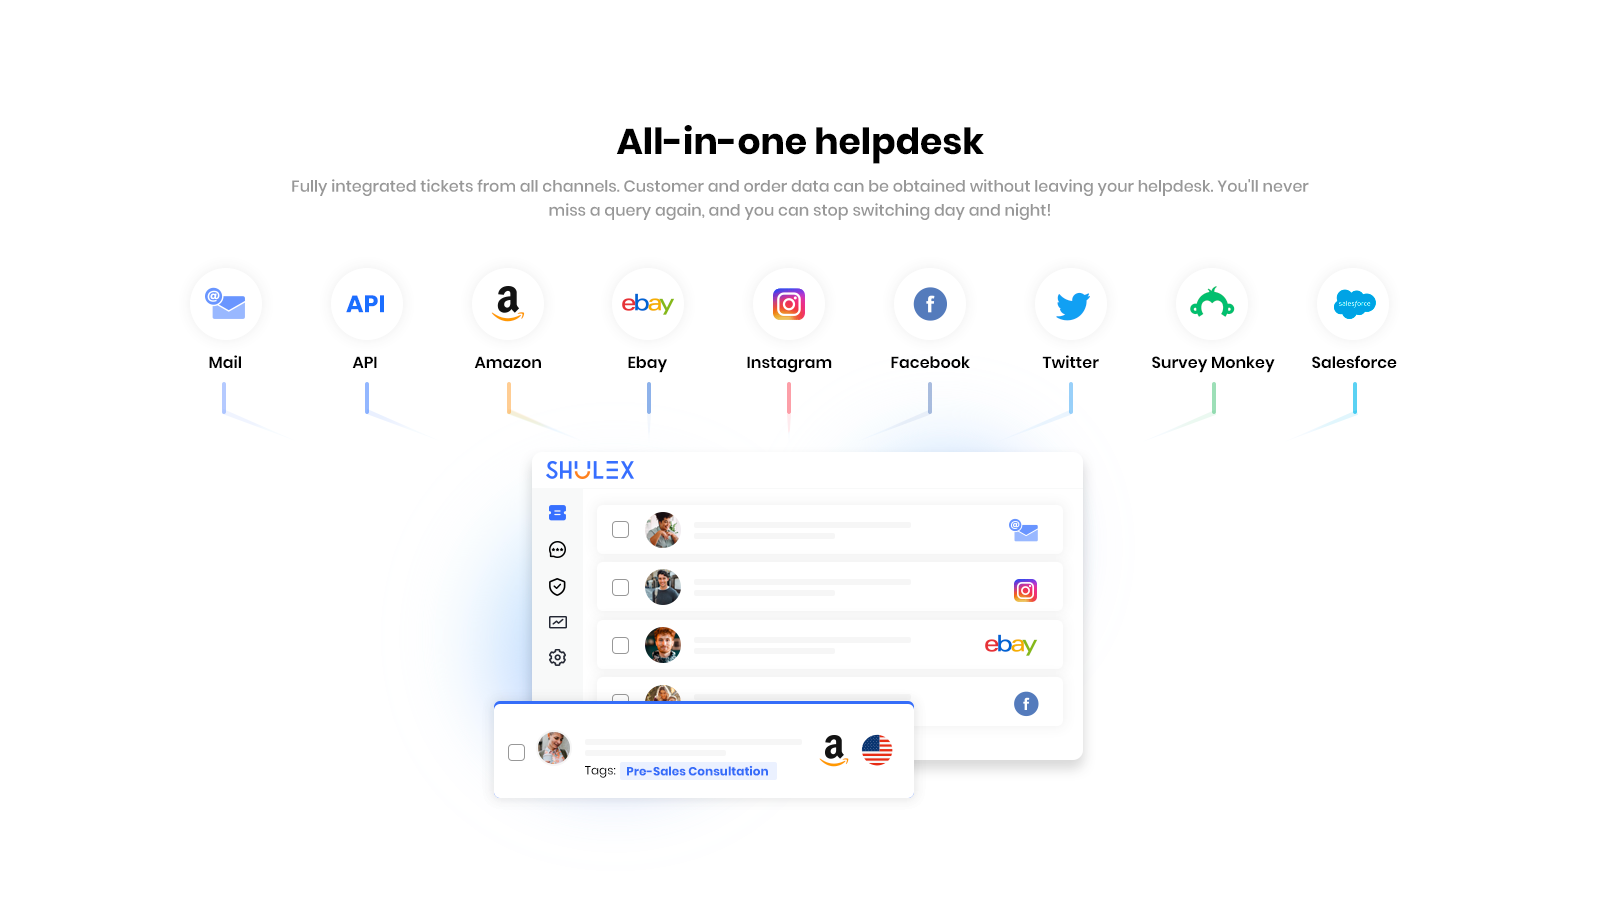 All-in-one helpdesk